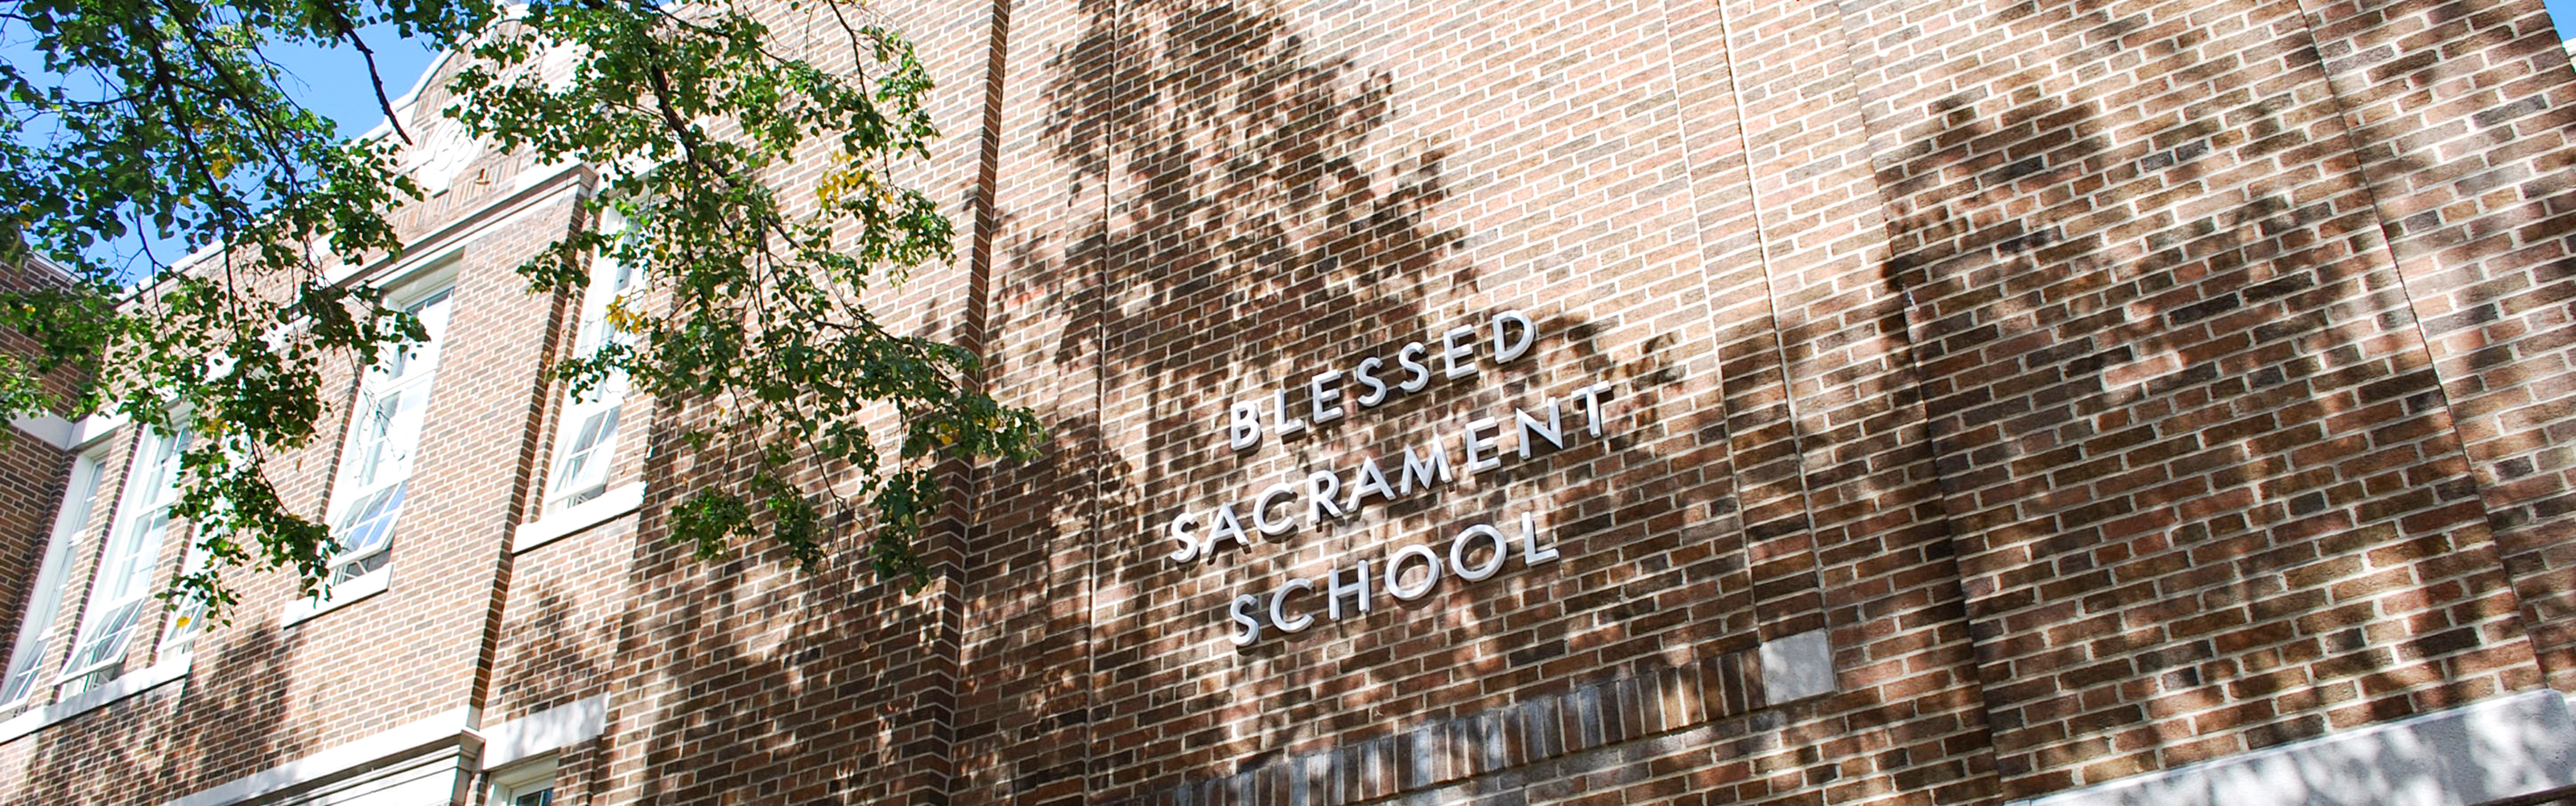 Front of the Blessed Sacrament Catholic School building